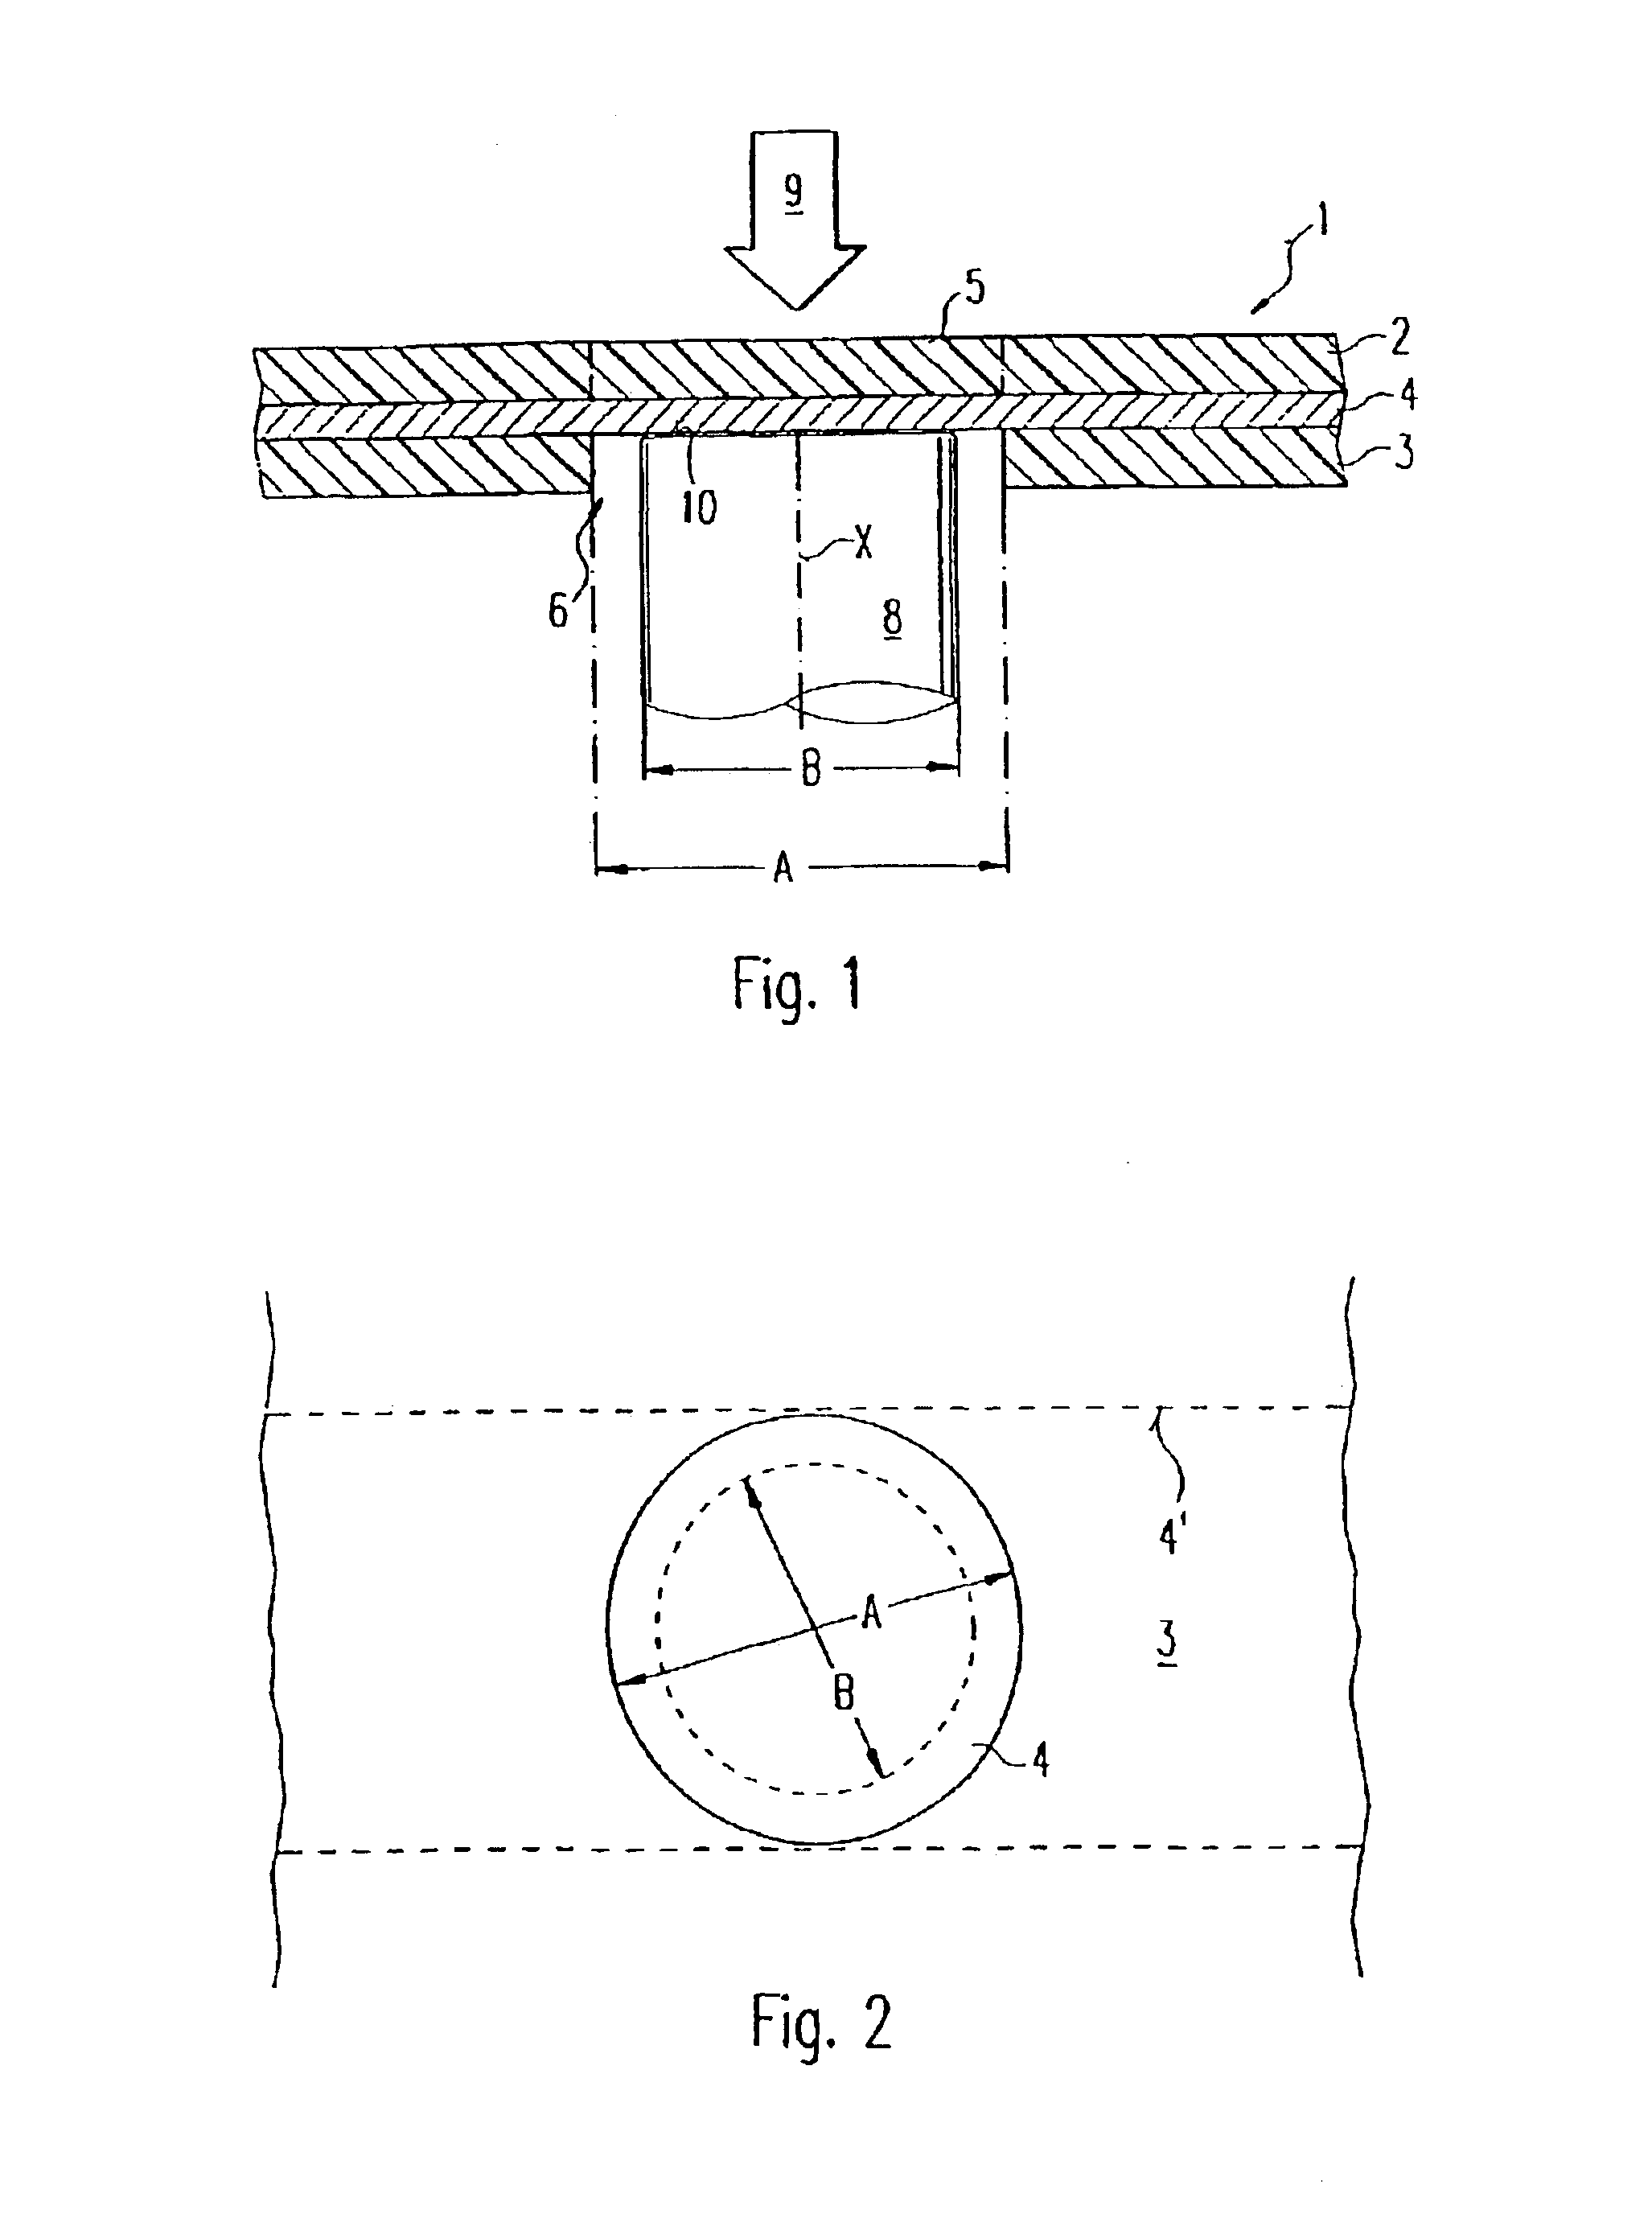 Method of laser welding a flexible circuit board with a metal contact